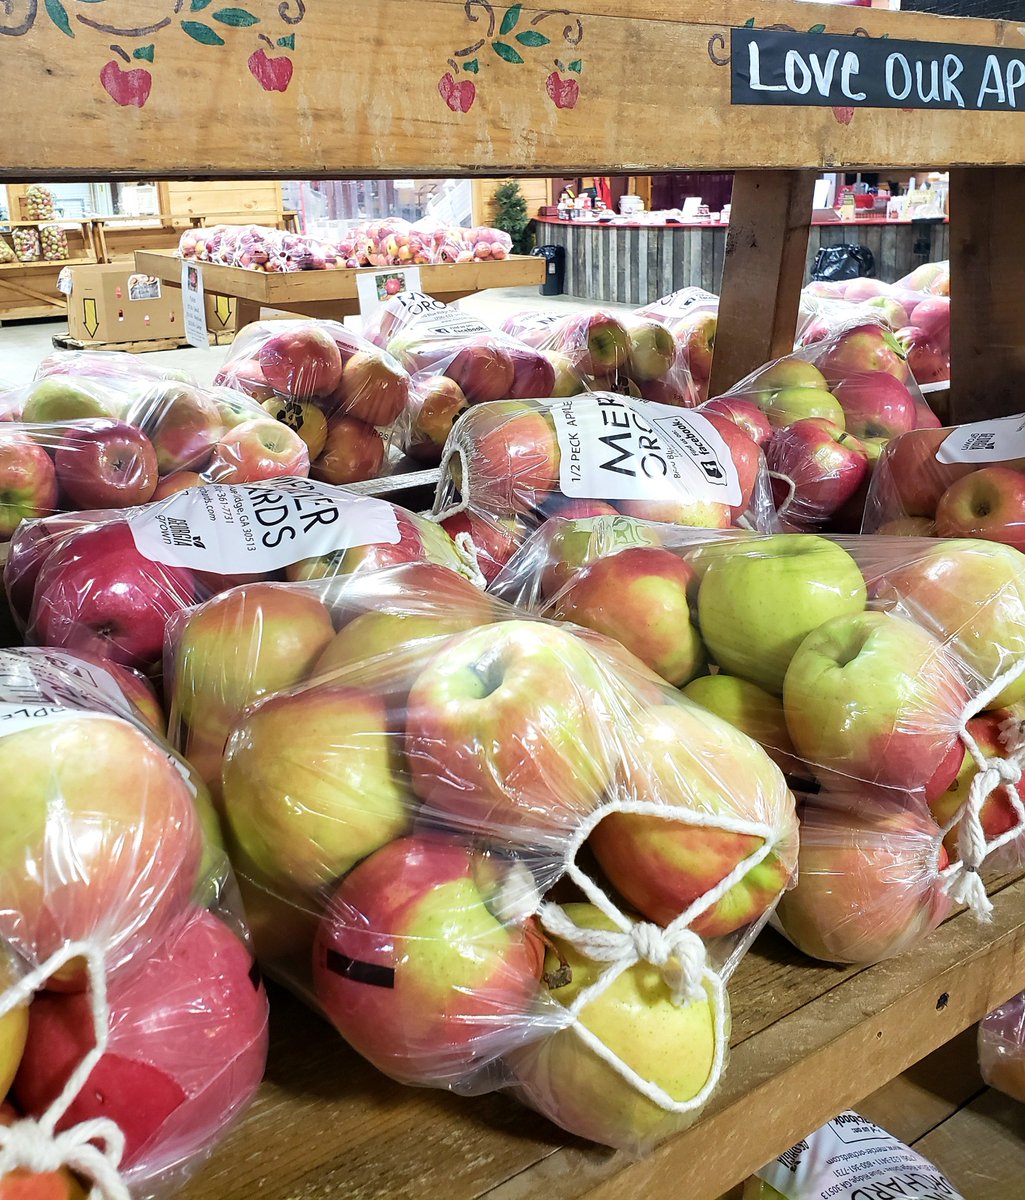 Still have apples in the market, Folks! Right now we have Arkansas Black, Cameo, Crimson Crisp, Fuji, Gold Rush and Pink Lady!